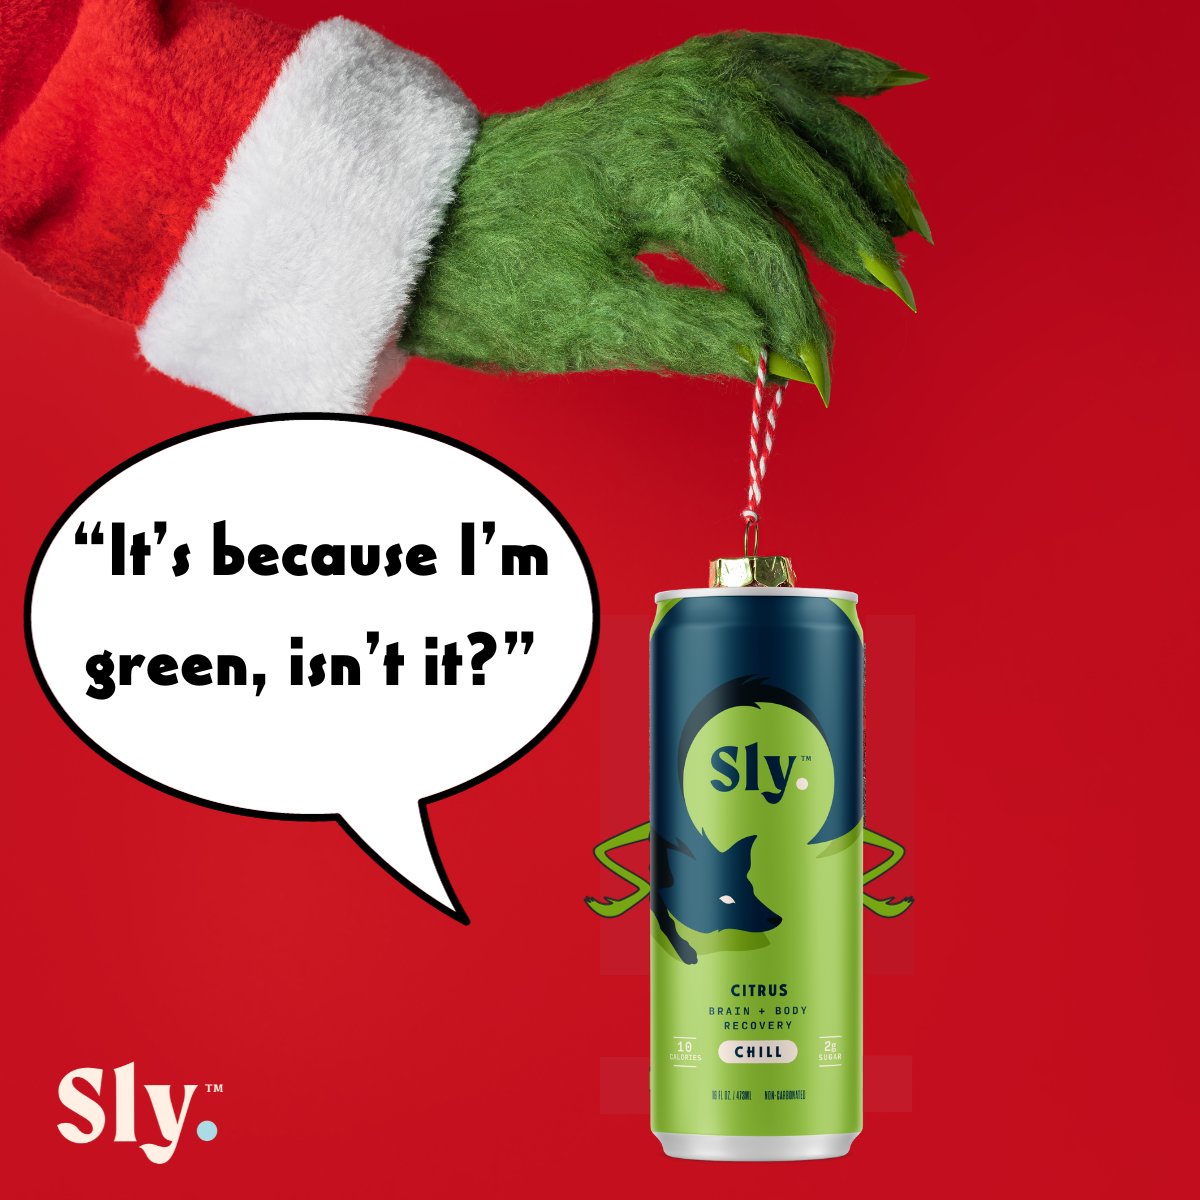 Whenever someone chooses Sly Mango CHILL over Citrus… #DrinkOnTheSly #HealthyHolidays #HappyHolidays #TheGrinchStoleSly
DRINKONTHESLY.COM